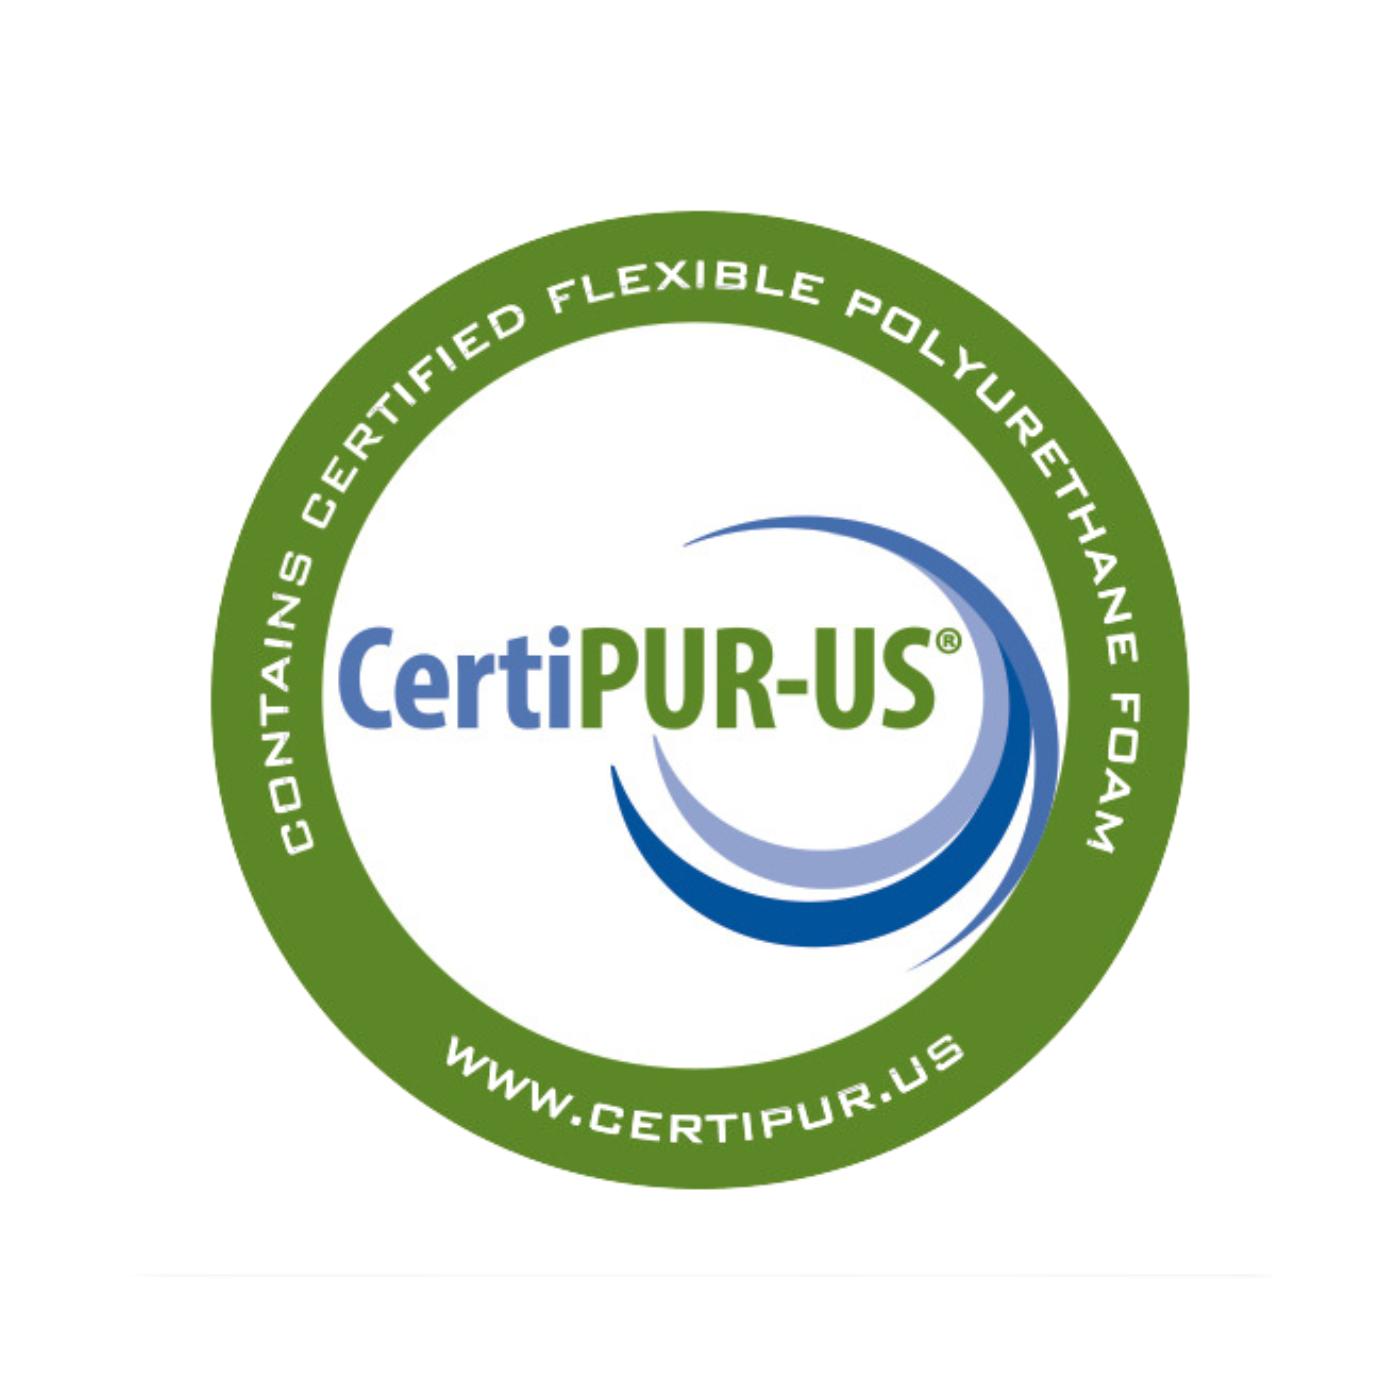 fibreglass free certified by certipur-us